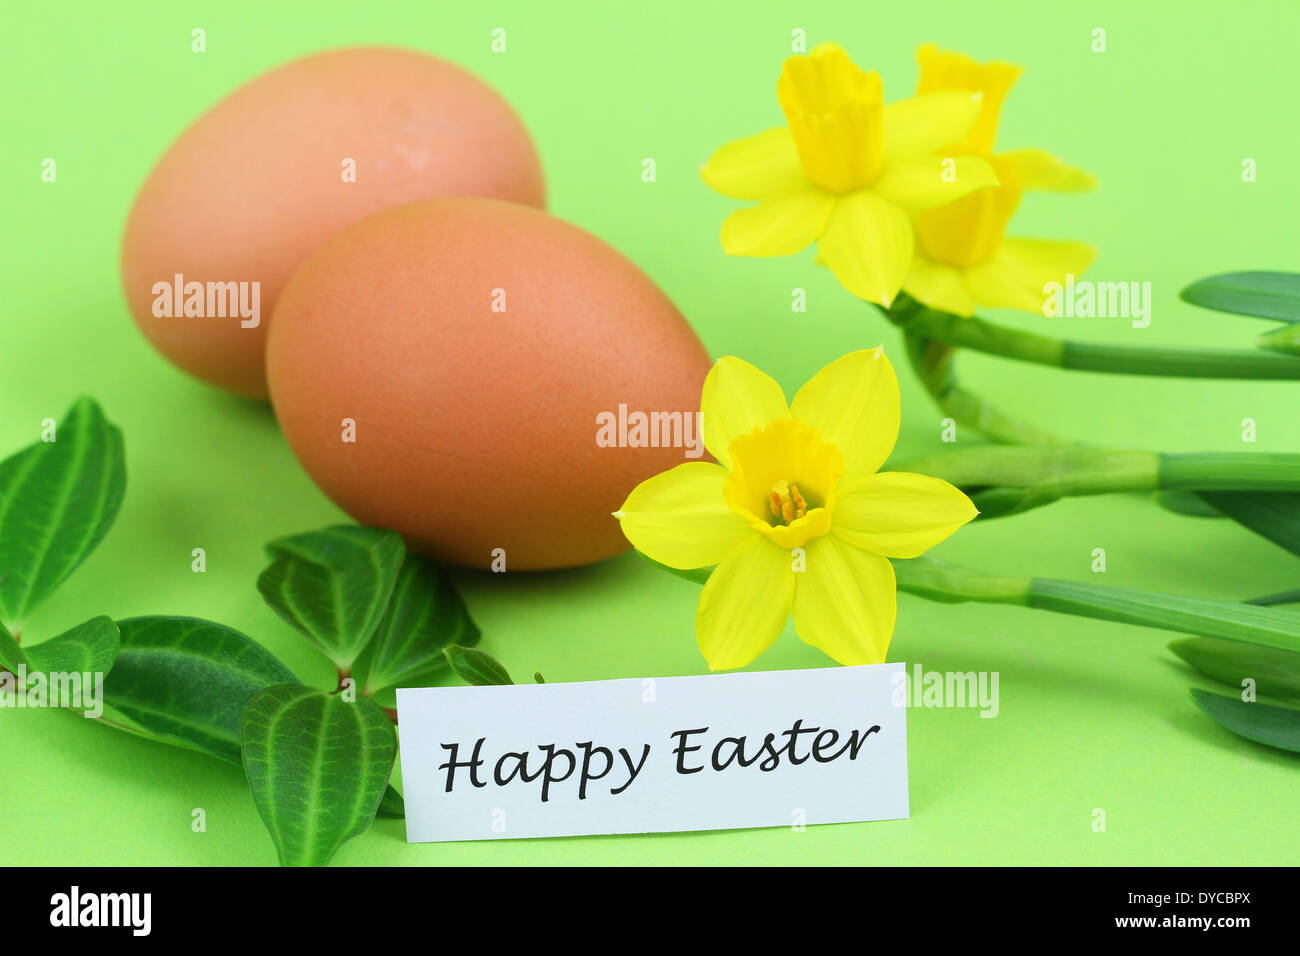 Happy Easter card with eggs and daffodils Stock Photo